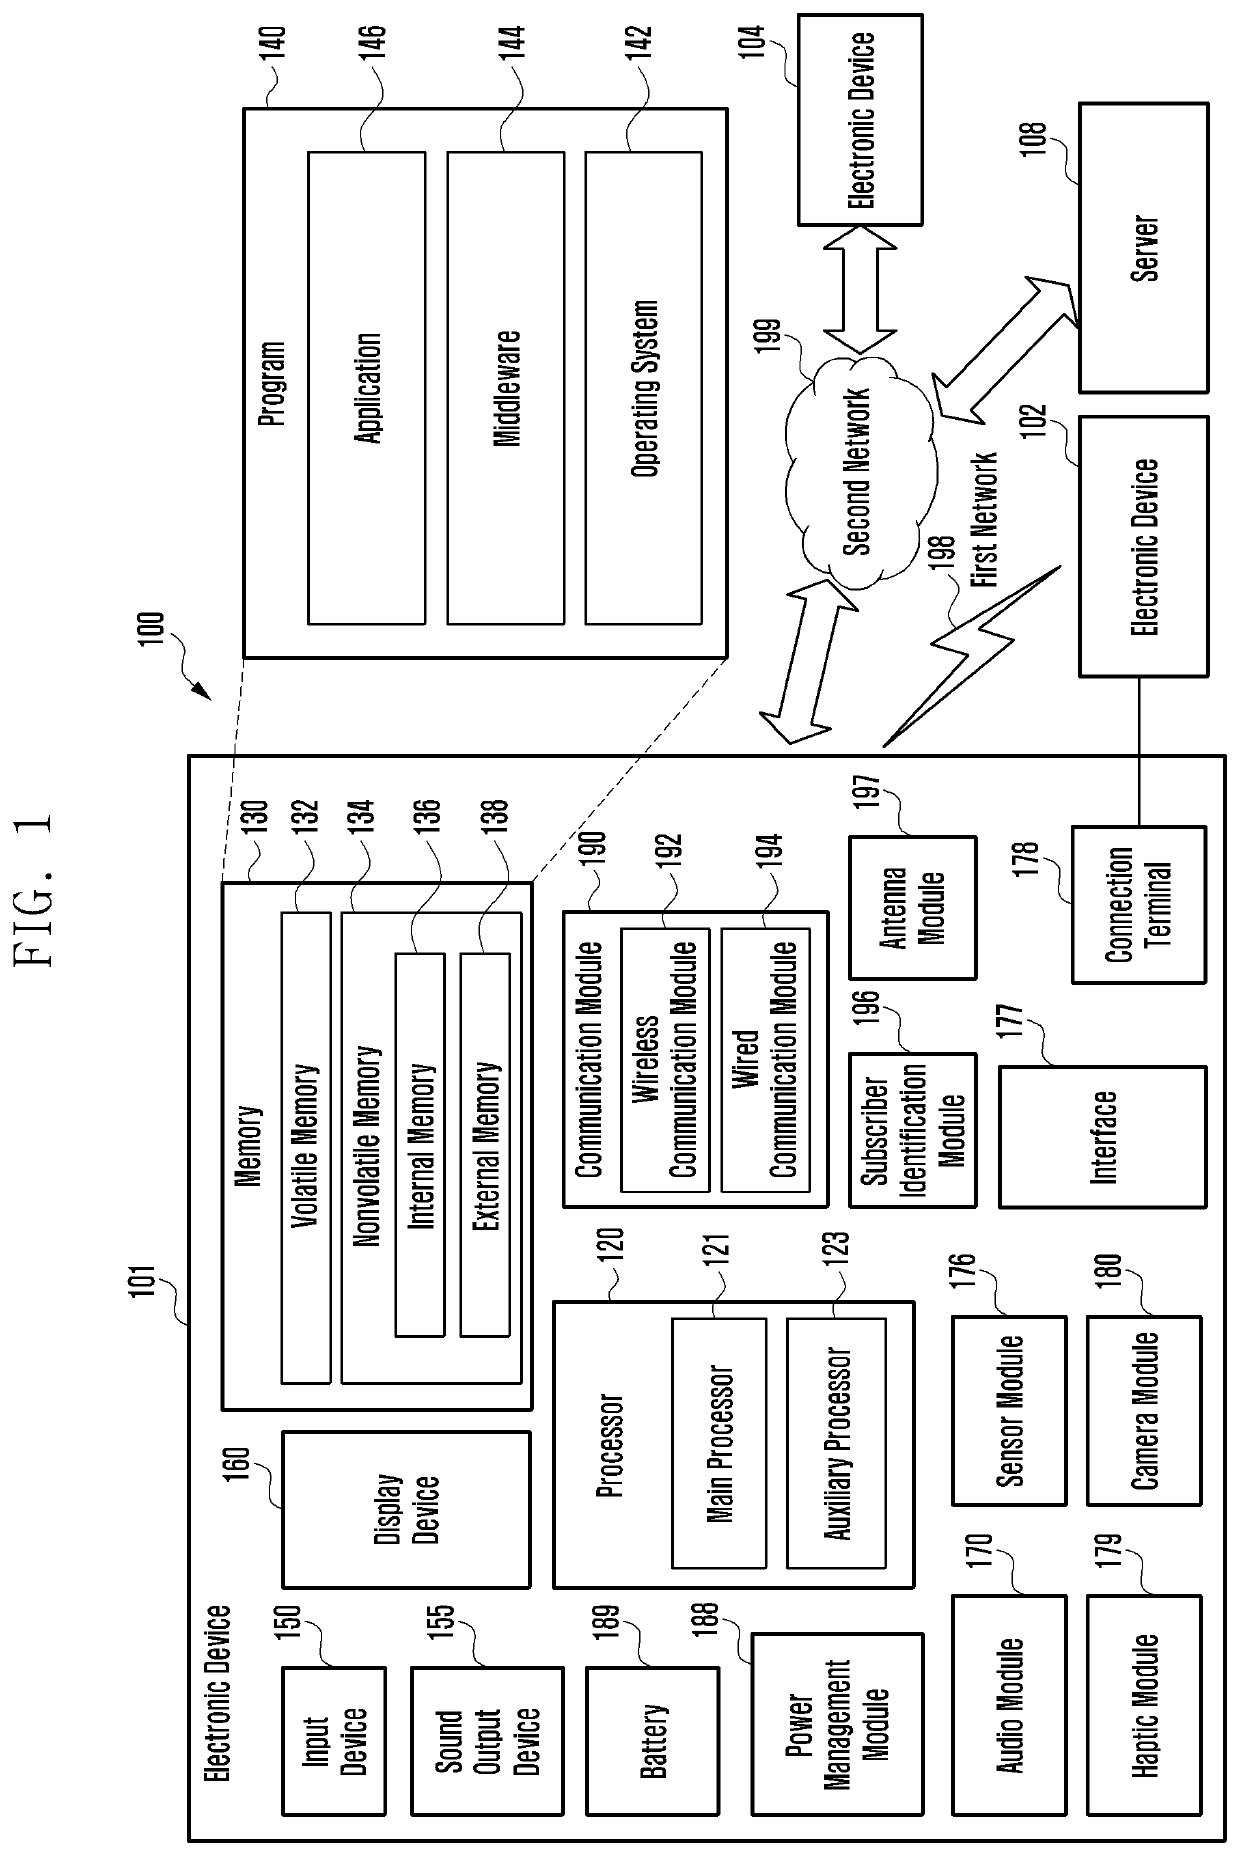 Method and apparatus for determining device for payment in multiple electronic devices